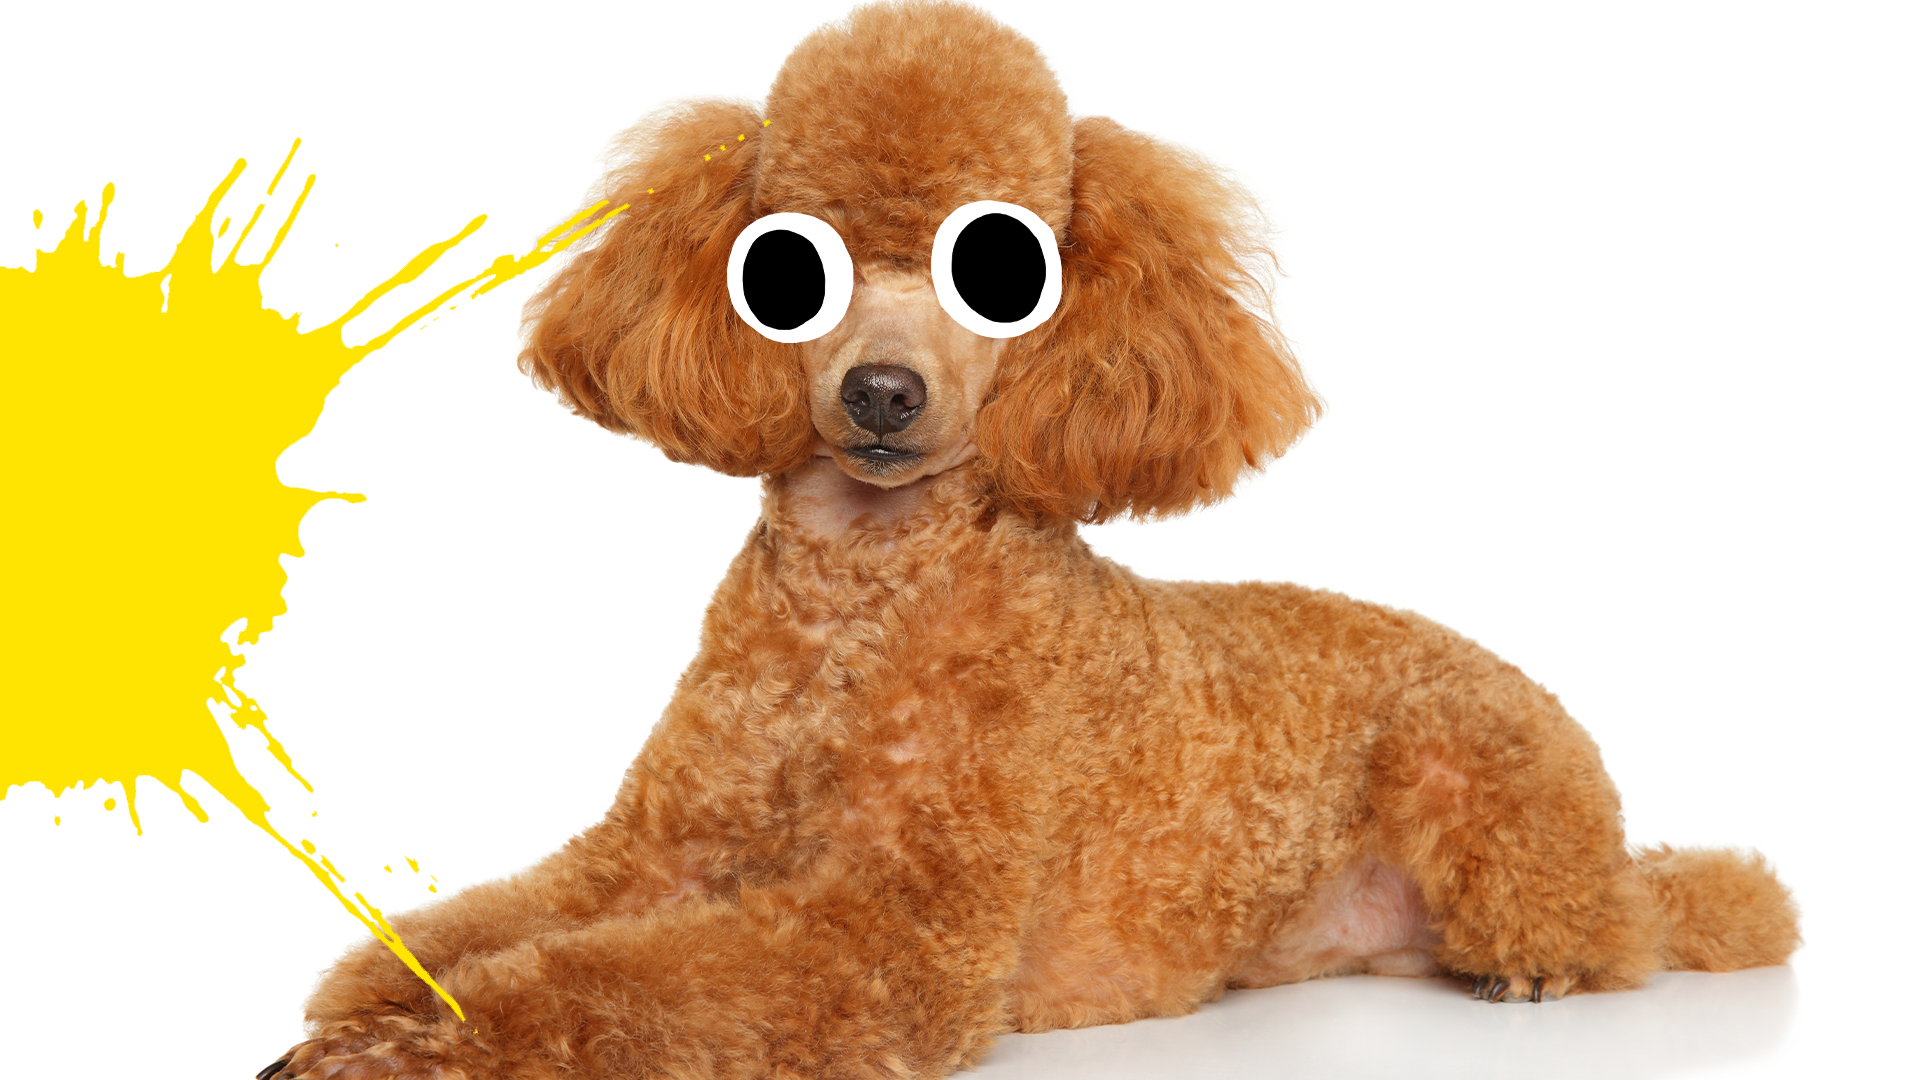 Poodle with googly eyes and yellow splat on white background 